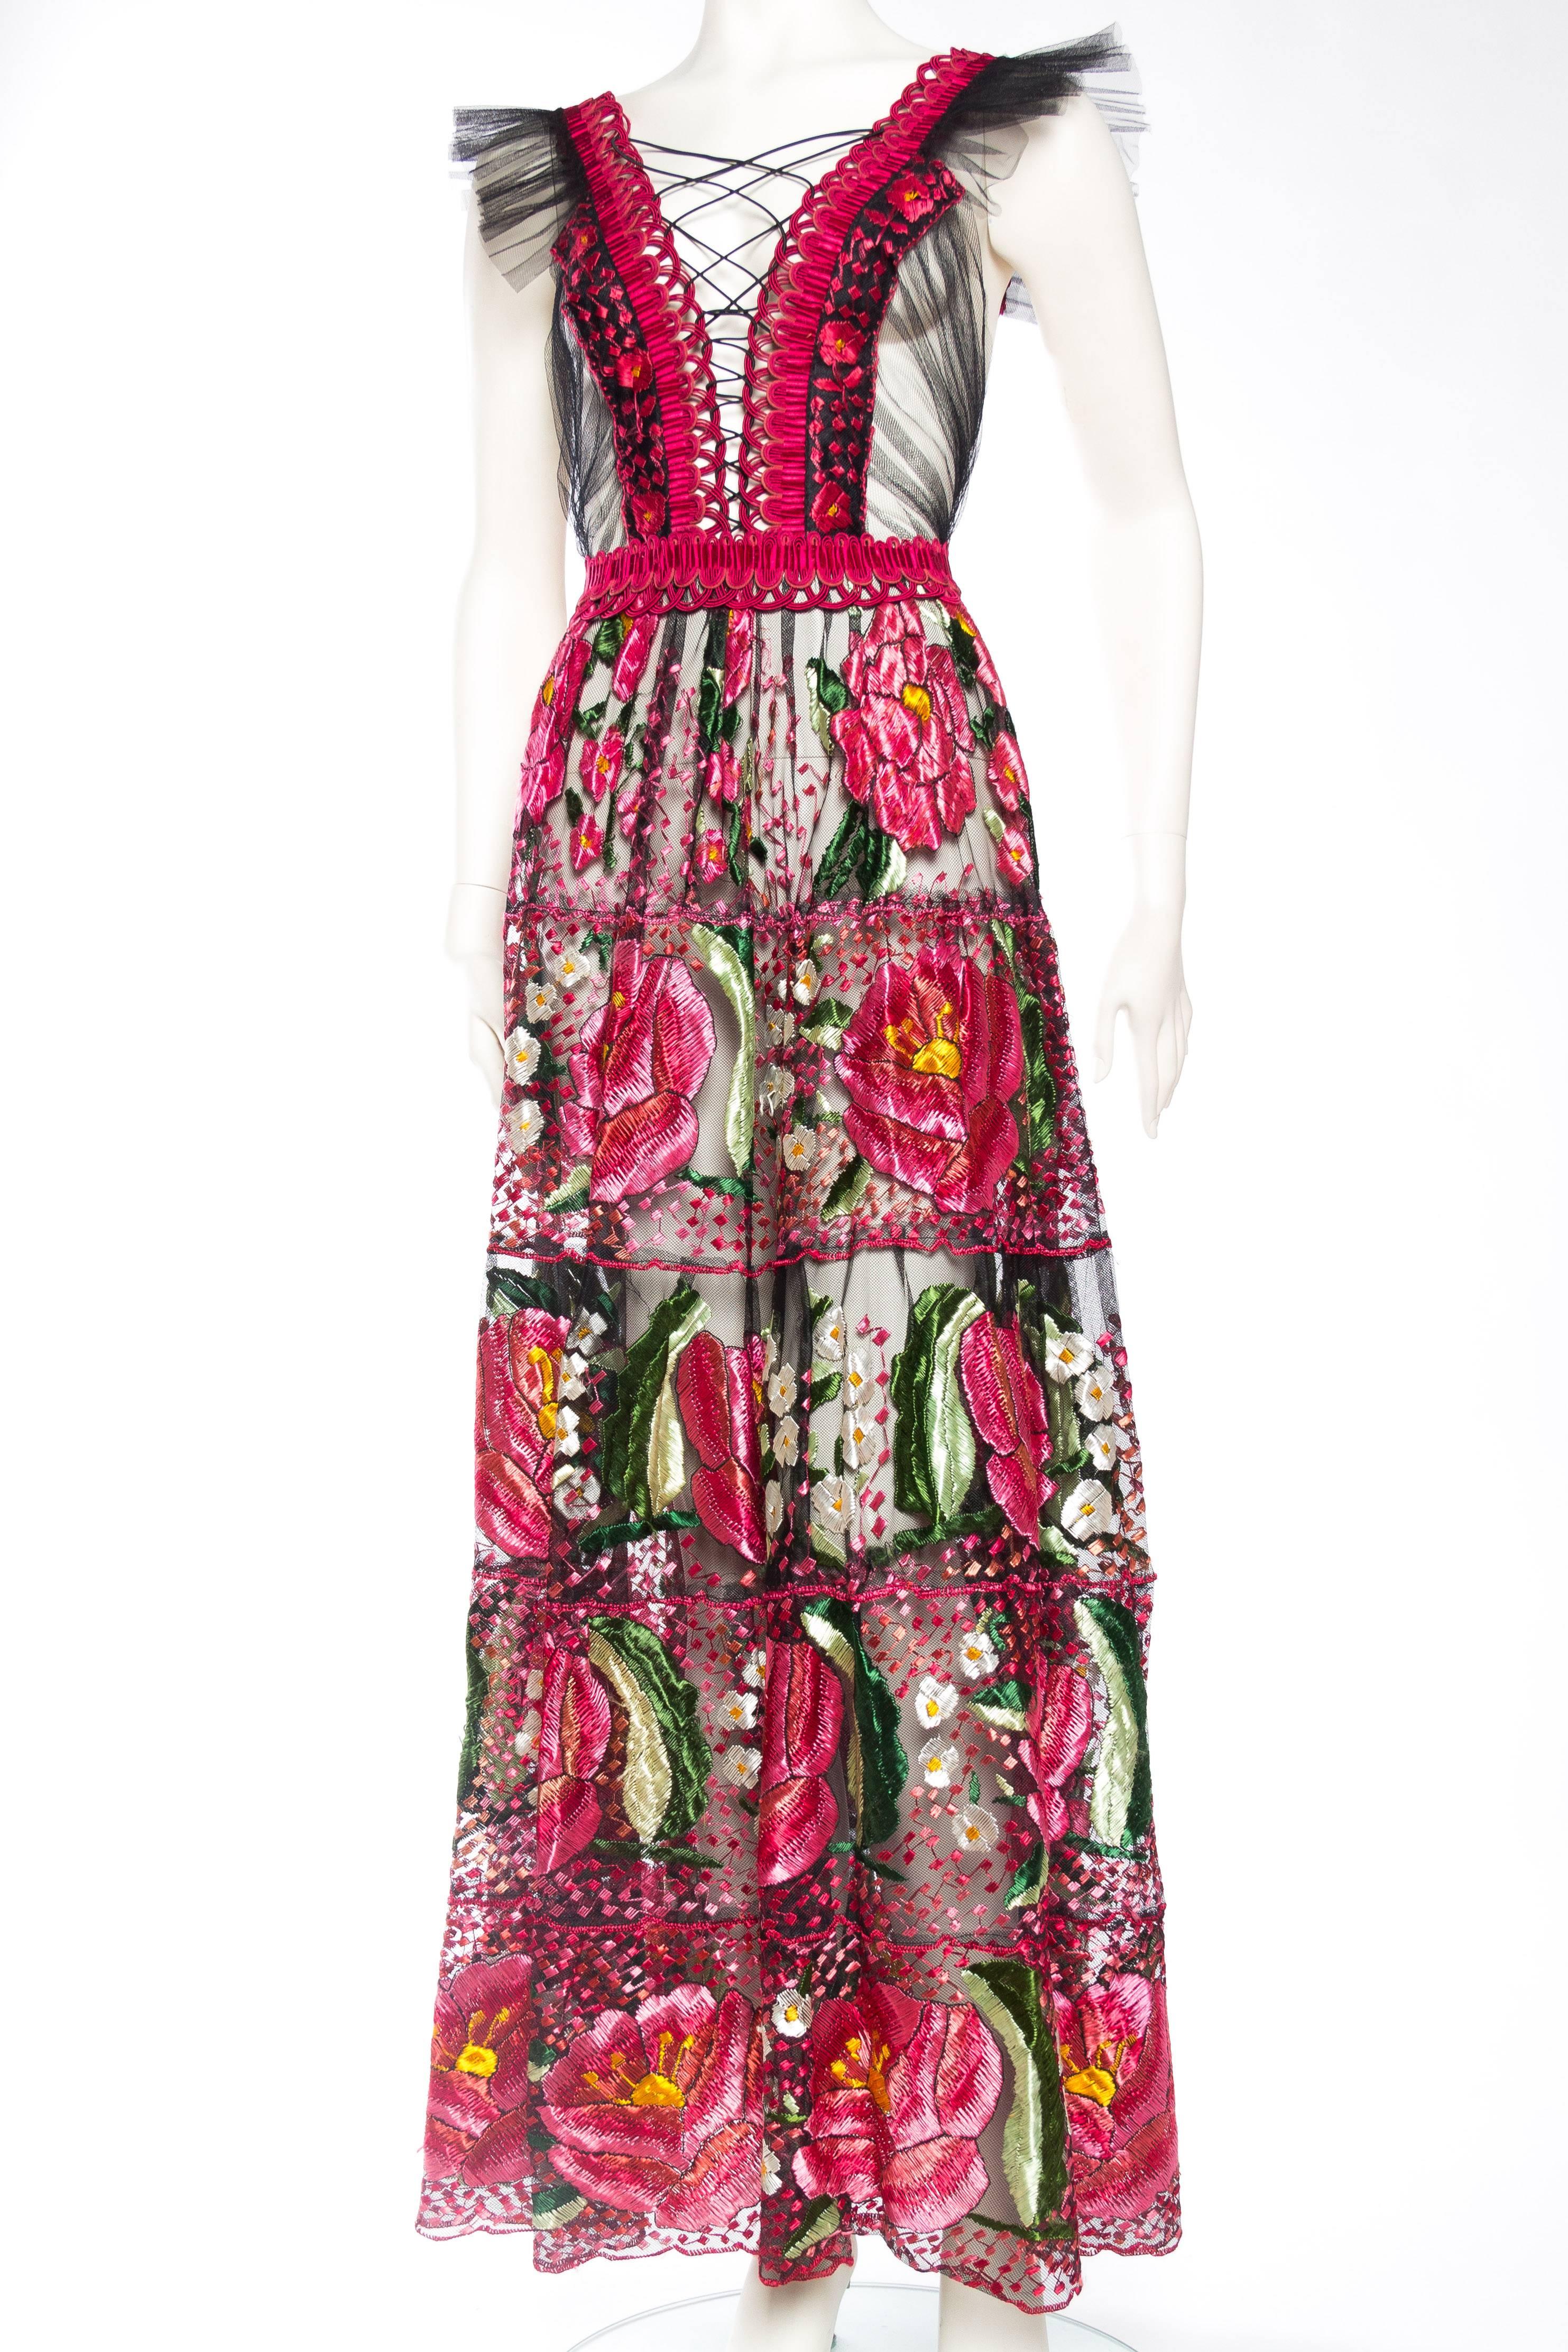 Bohemian Inspired Fully Embroidered Sheer Net Dress made from antique fabrics and trims. 